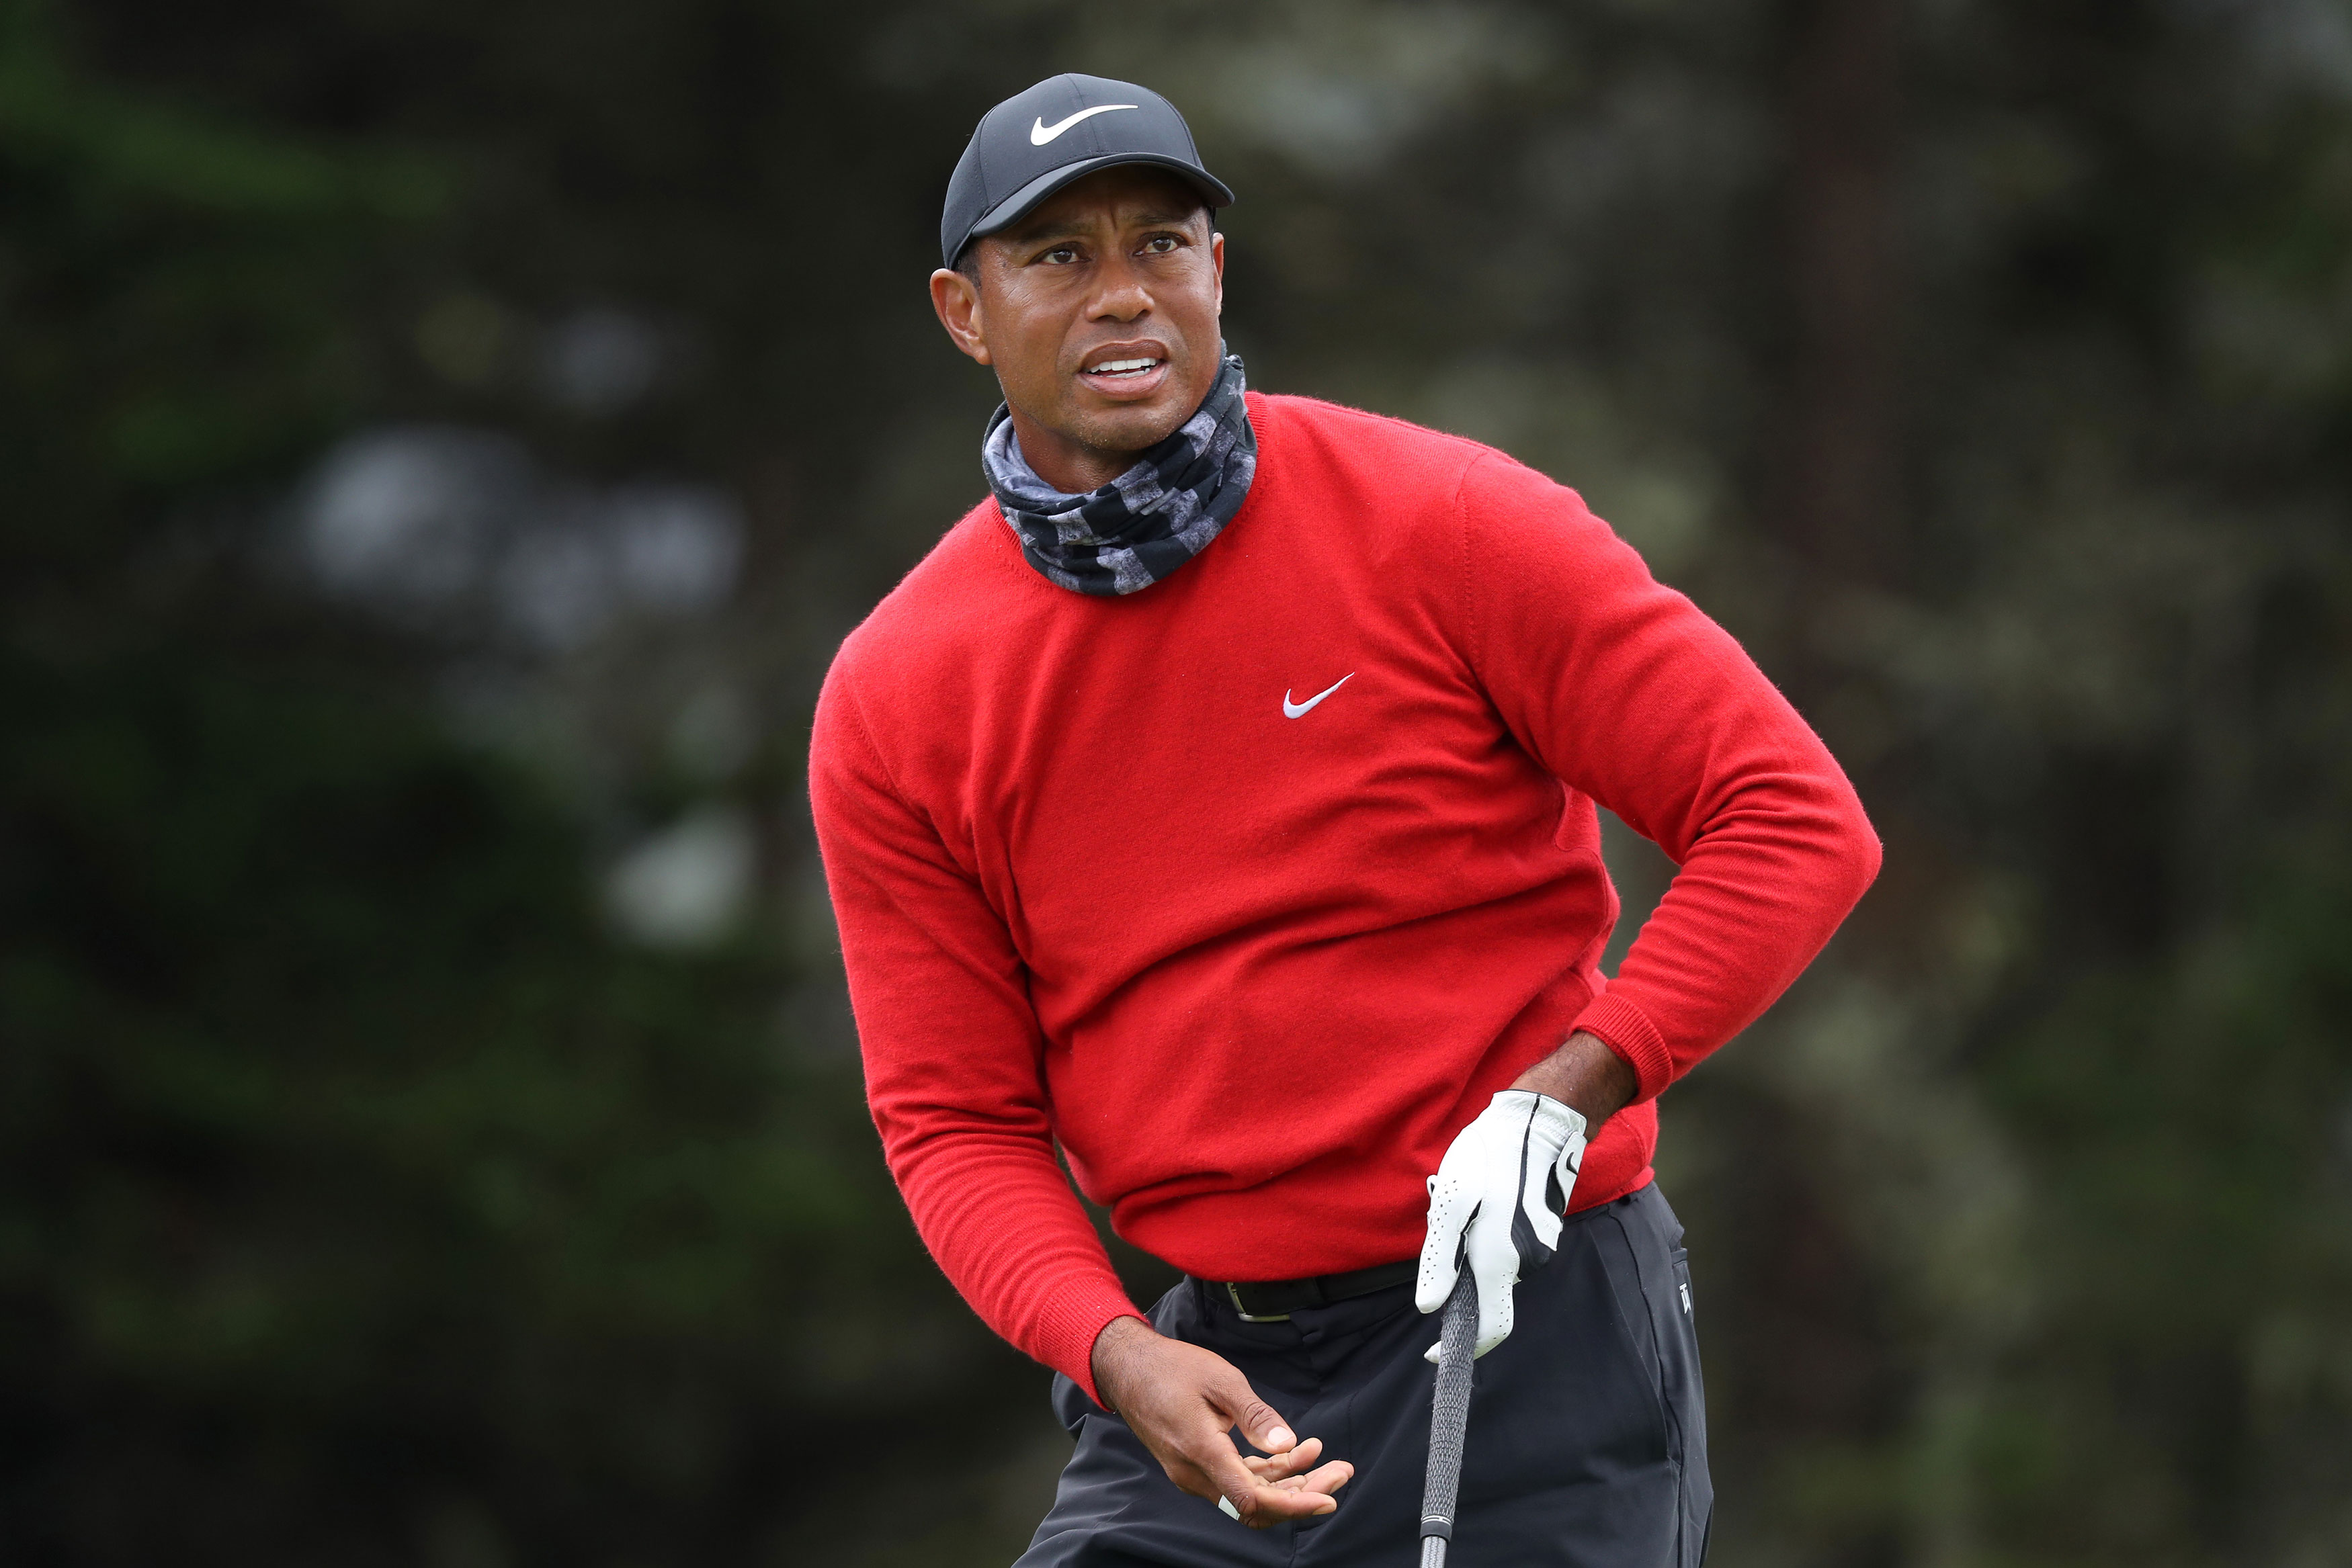 SAN FRANCISCO, CALIFORNIA - AUGUST 09: Tiger Woods of the United States reacts to his shot from the 14th tee during the final round of the 2020 PGA Championship at TPC Harding Park on August 09, 2020 in San Francisco, California. (Photo by Jamie Squire/Getty Images)